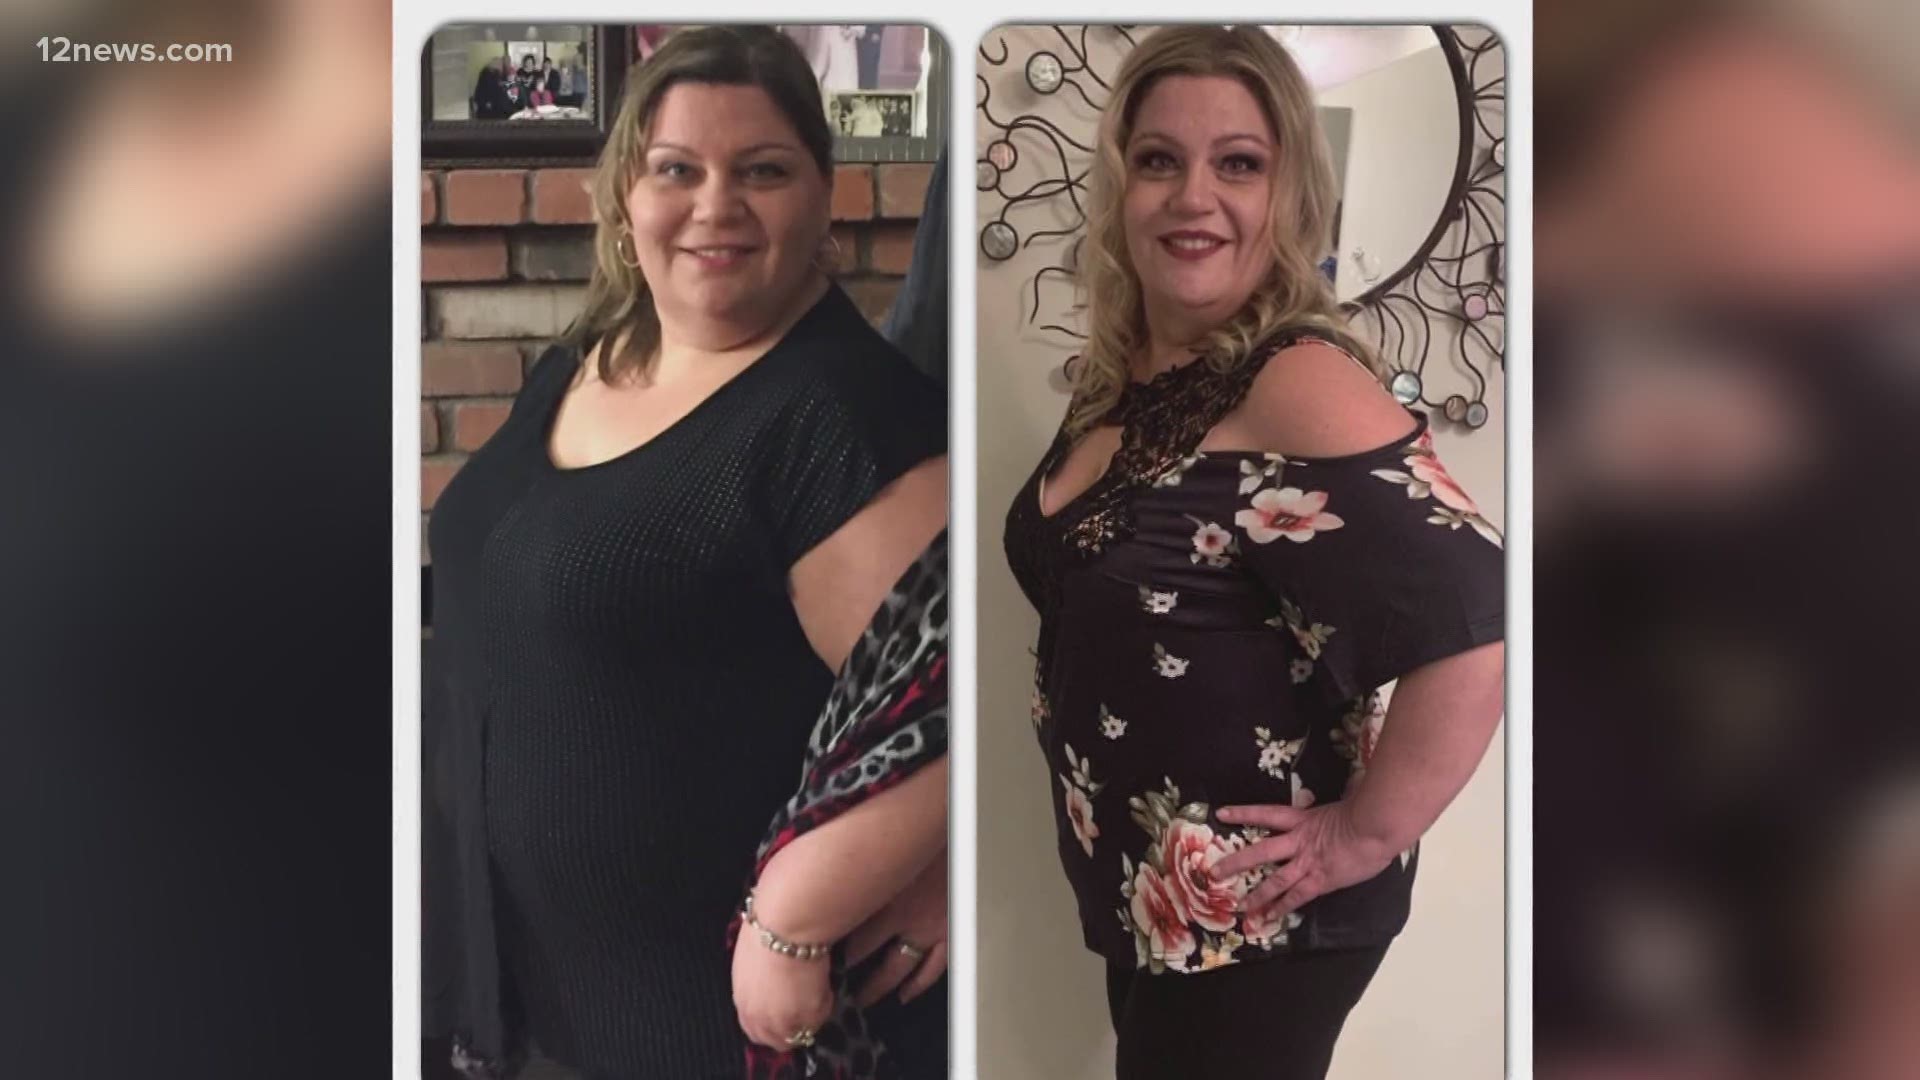 A Valley mom is sharing her weight loss journey at a time when gyms are closed. Danielle Canzoneri is inspiring many as she works toward losing 100 pounds.